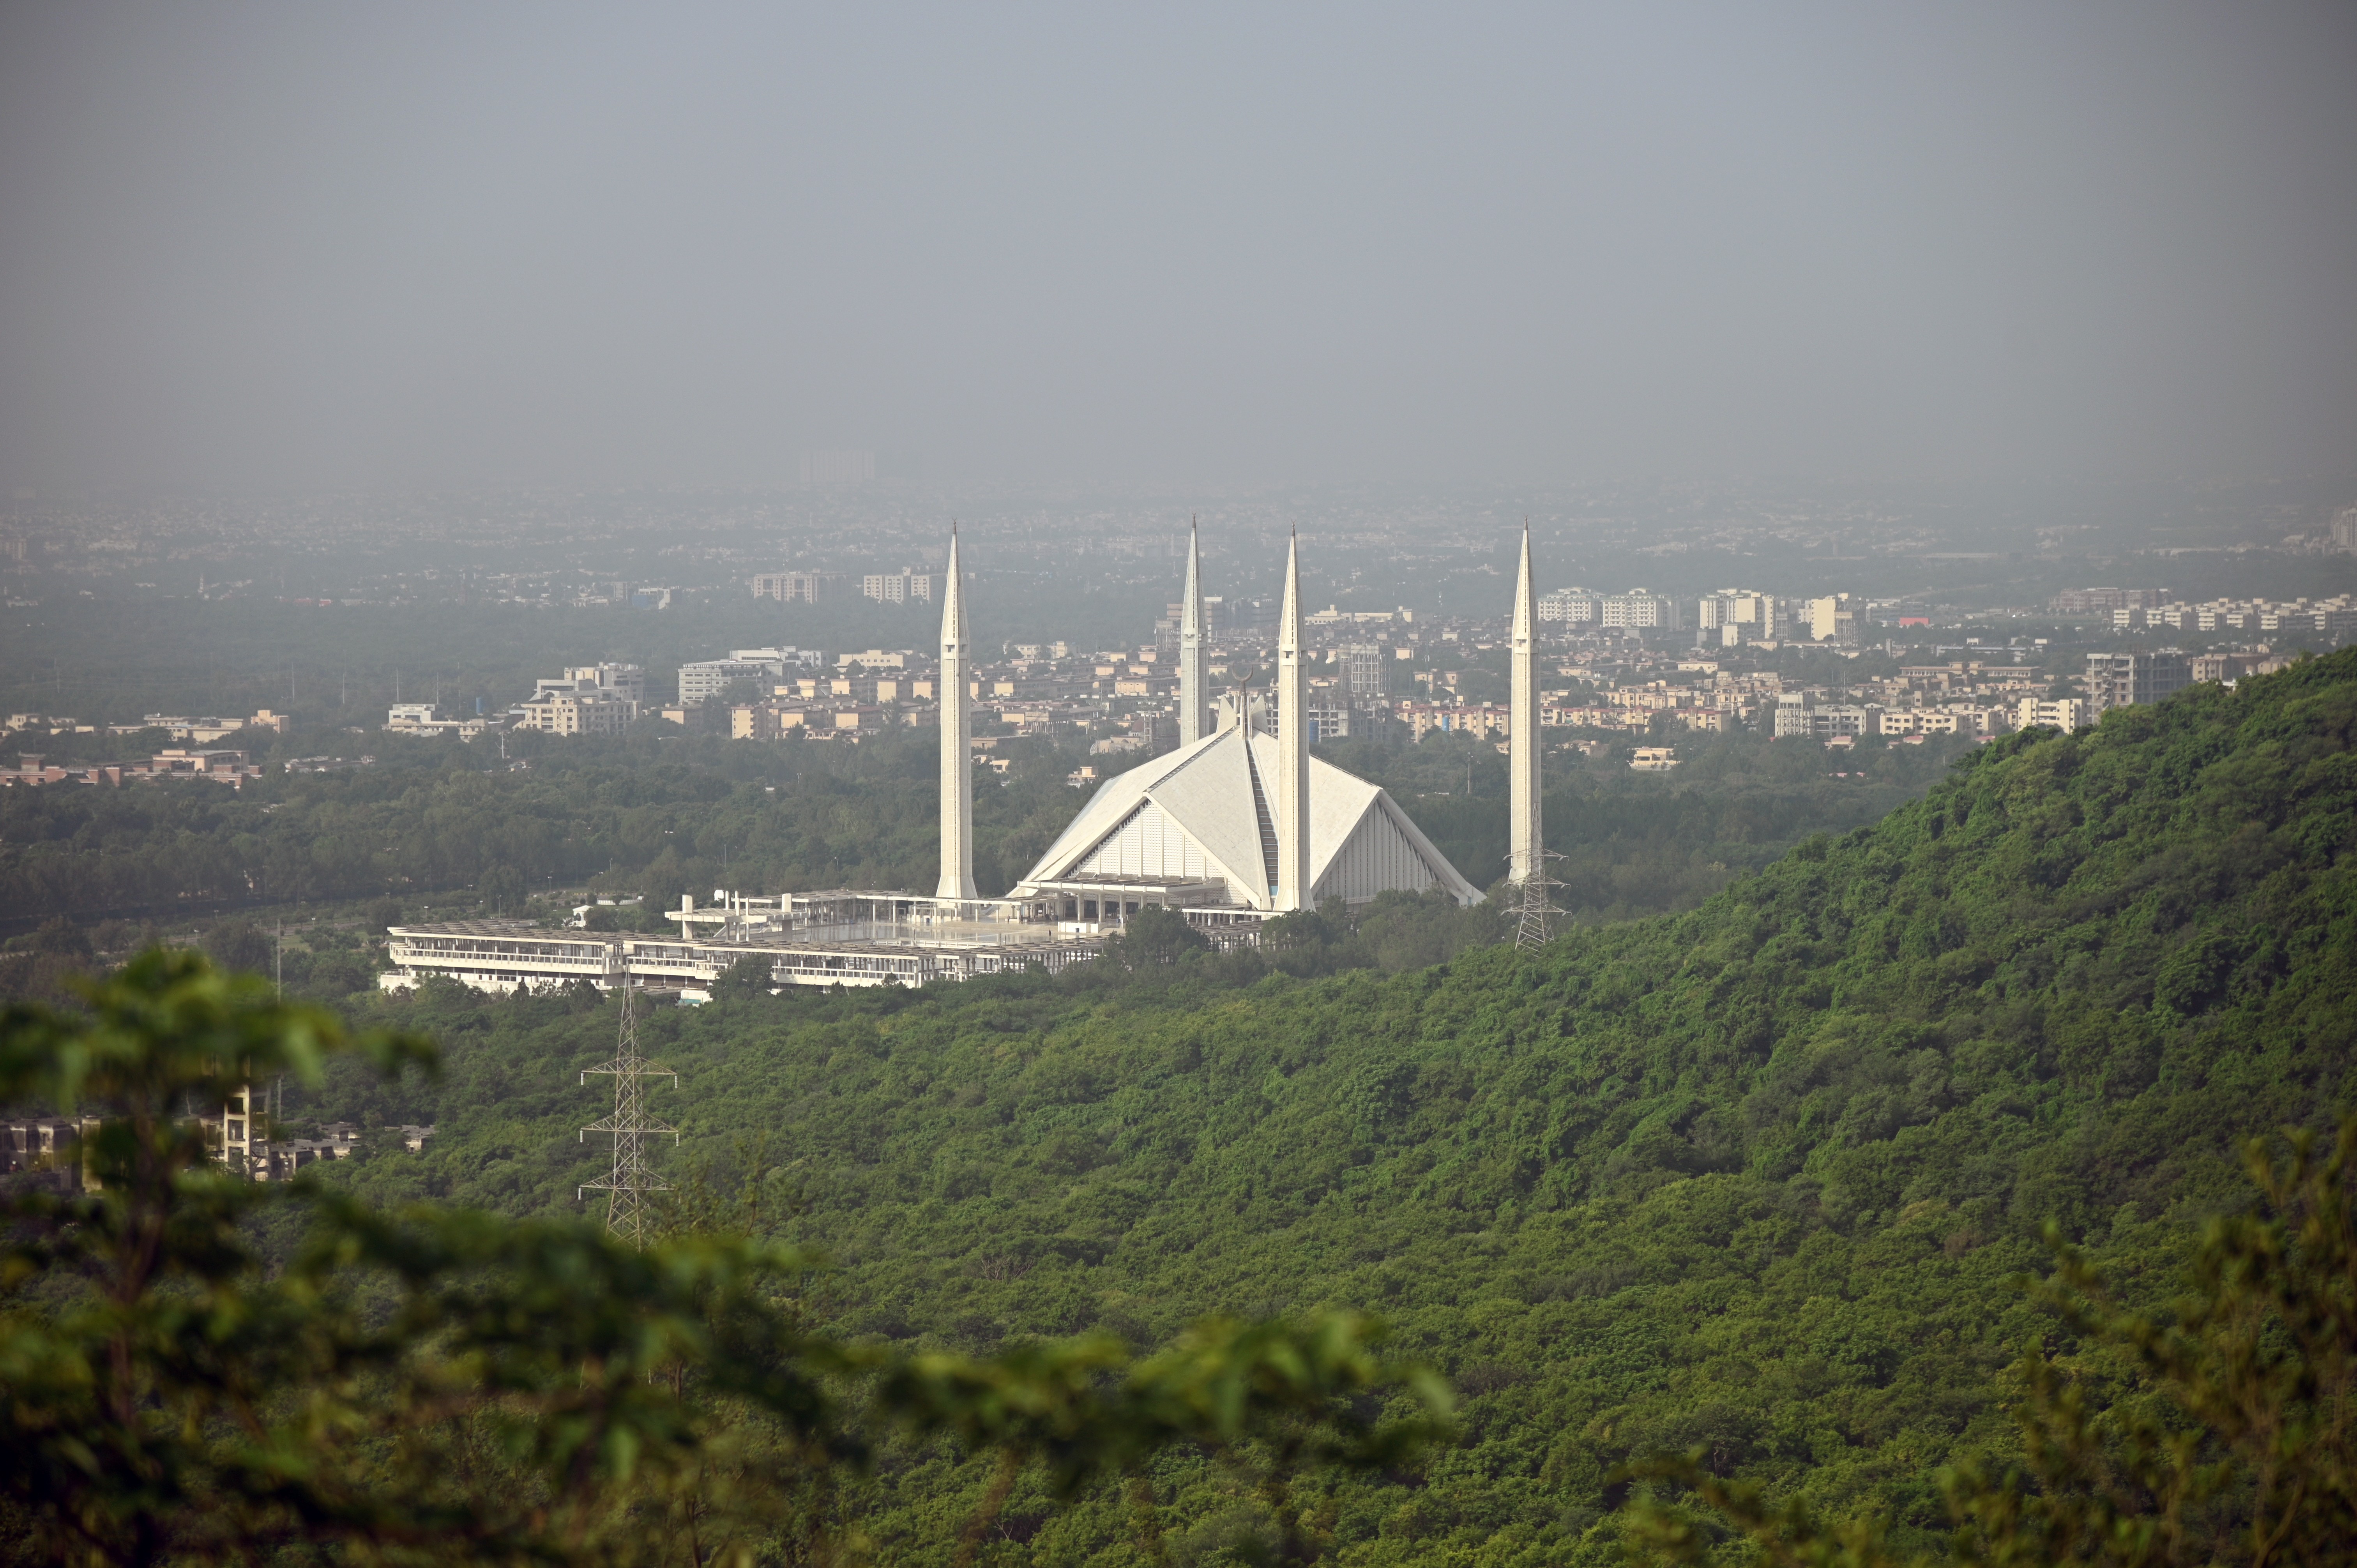 The ariel view of Shah Faisal Mosque situated in between the Margalla Hills